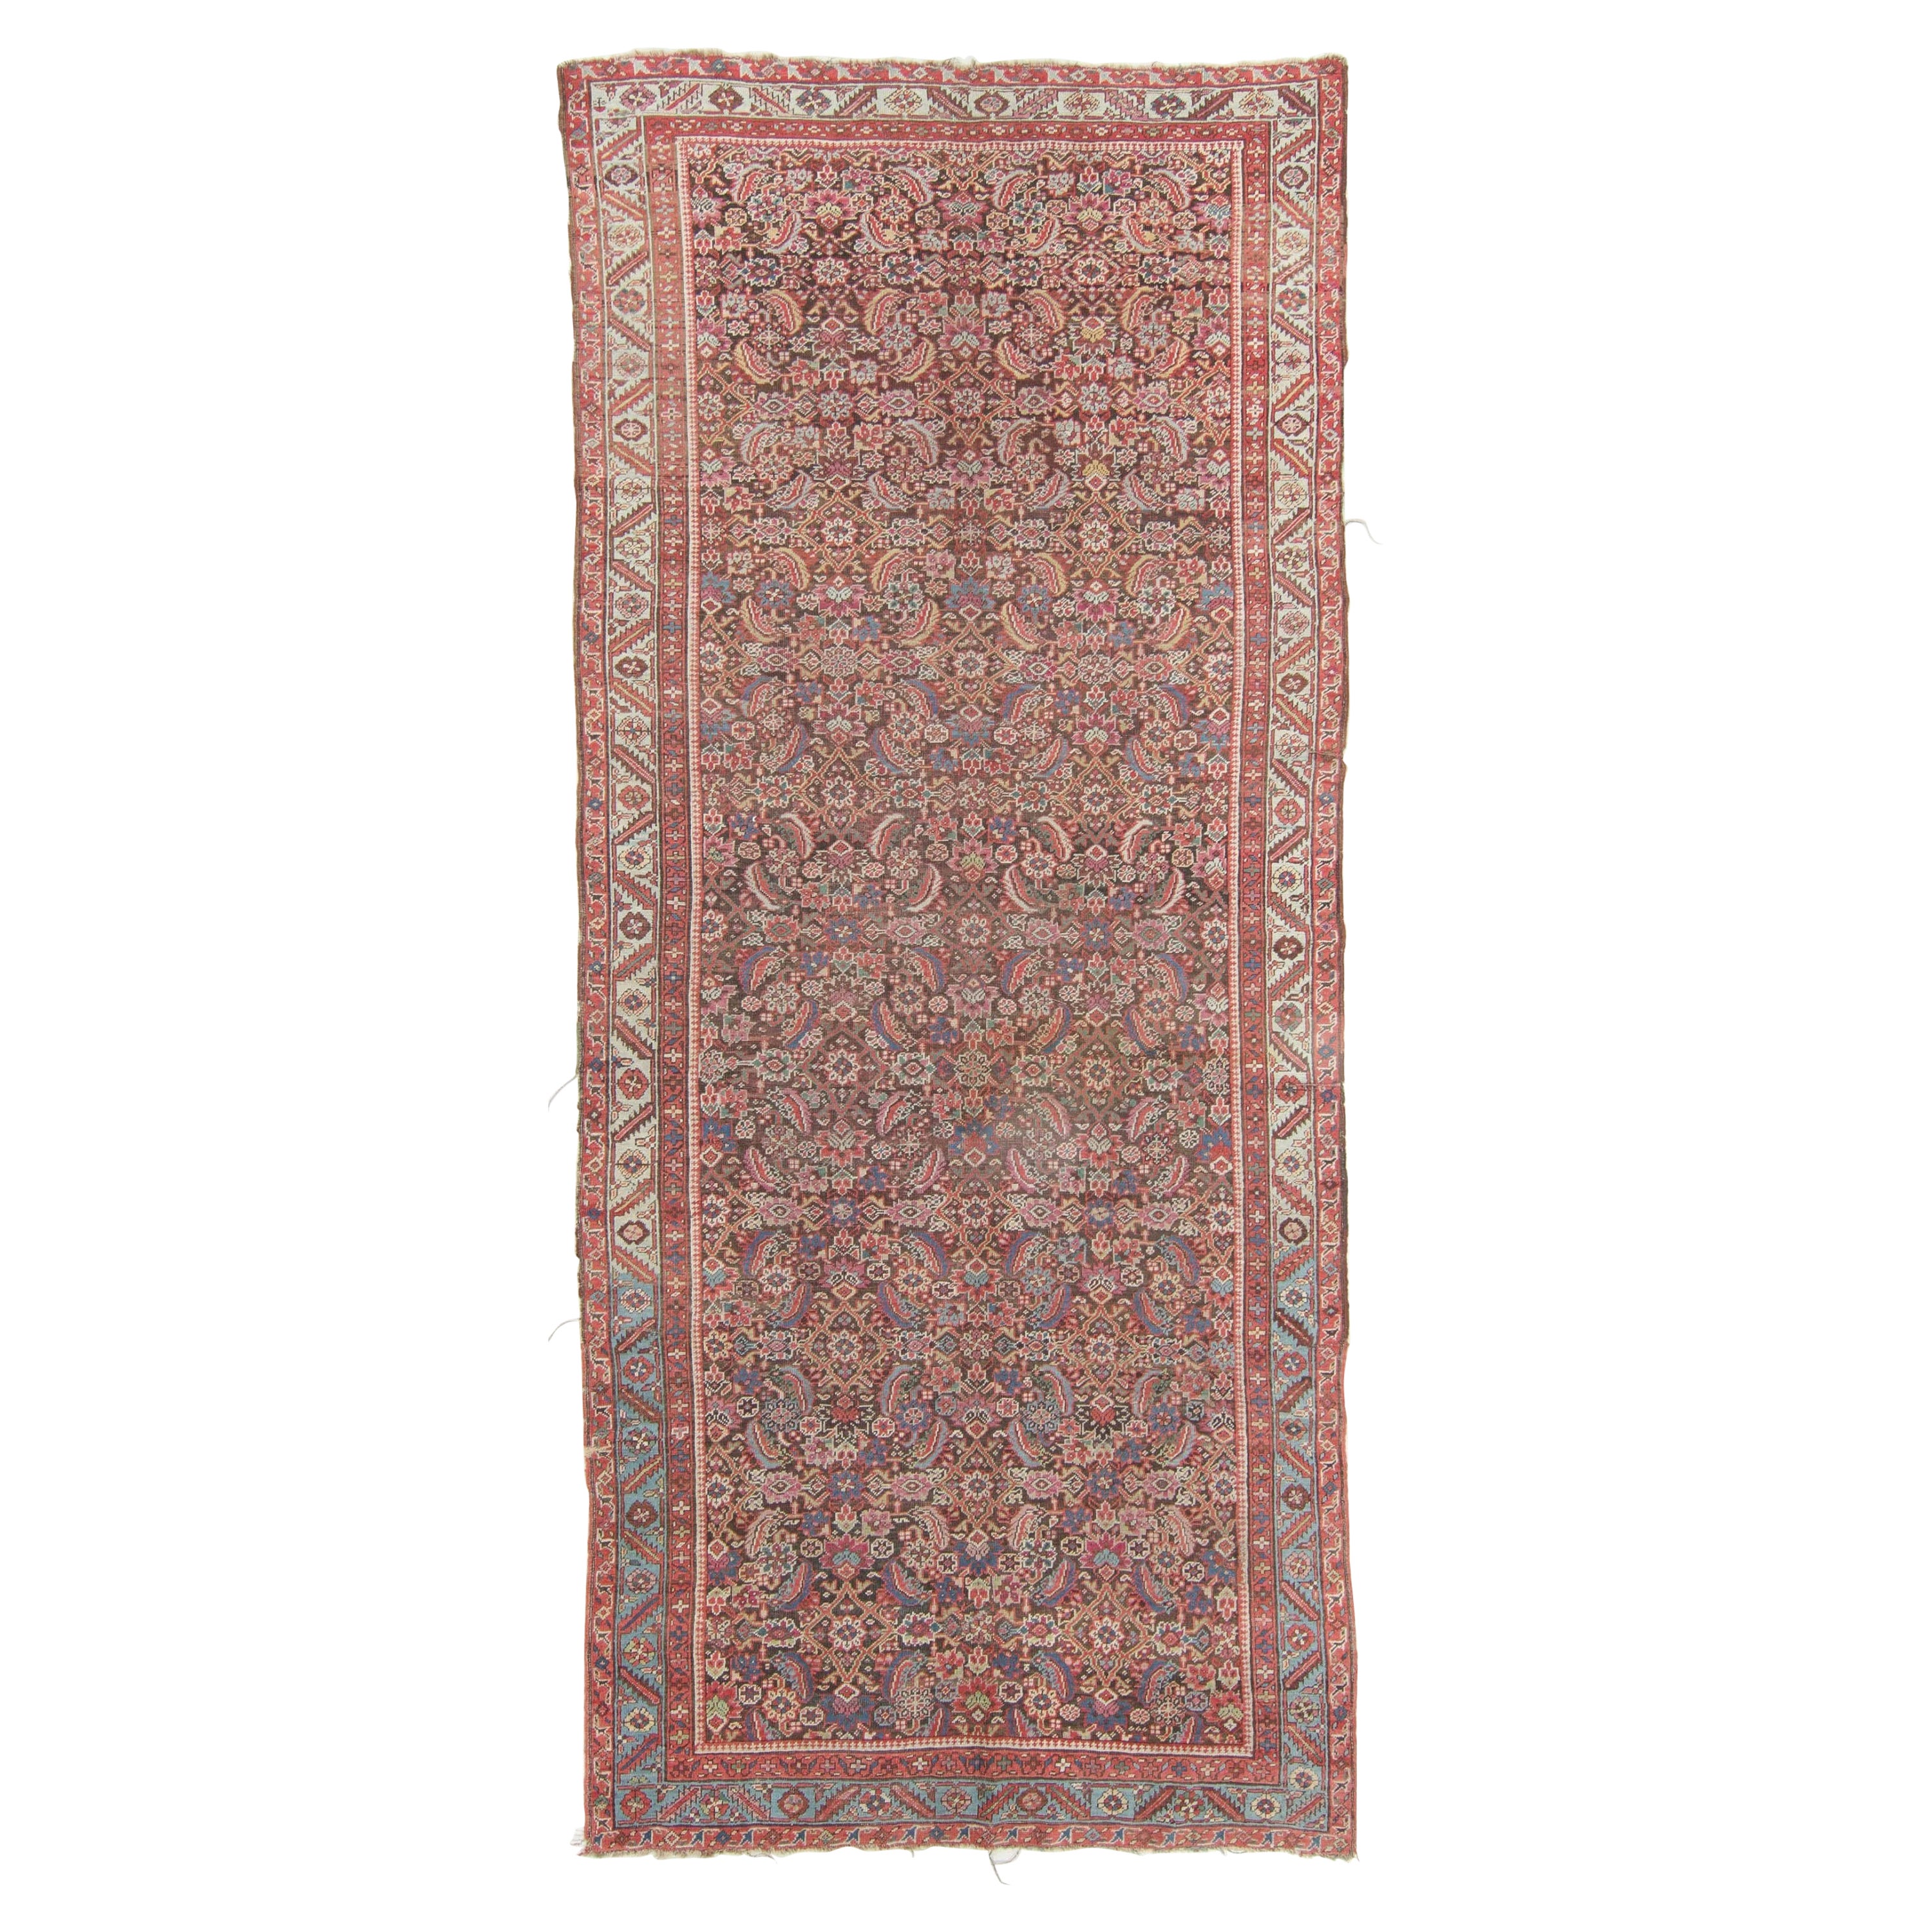 Beautiful Antique European Sized Ancient Rug, 1920's